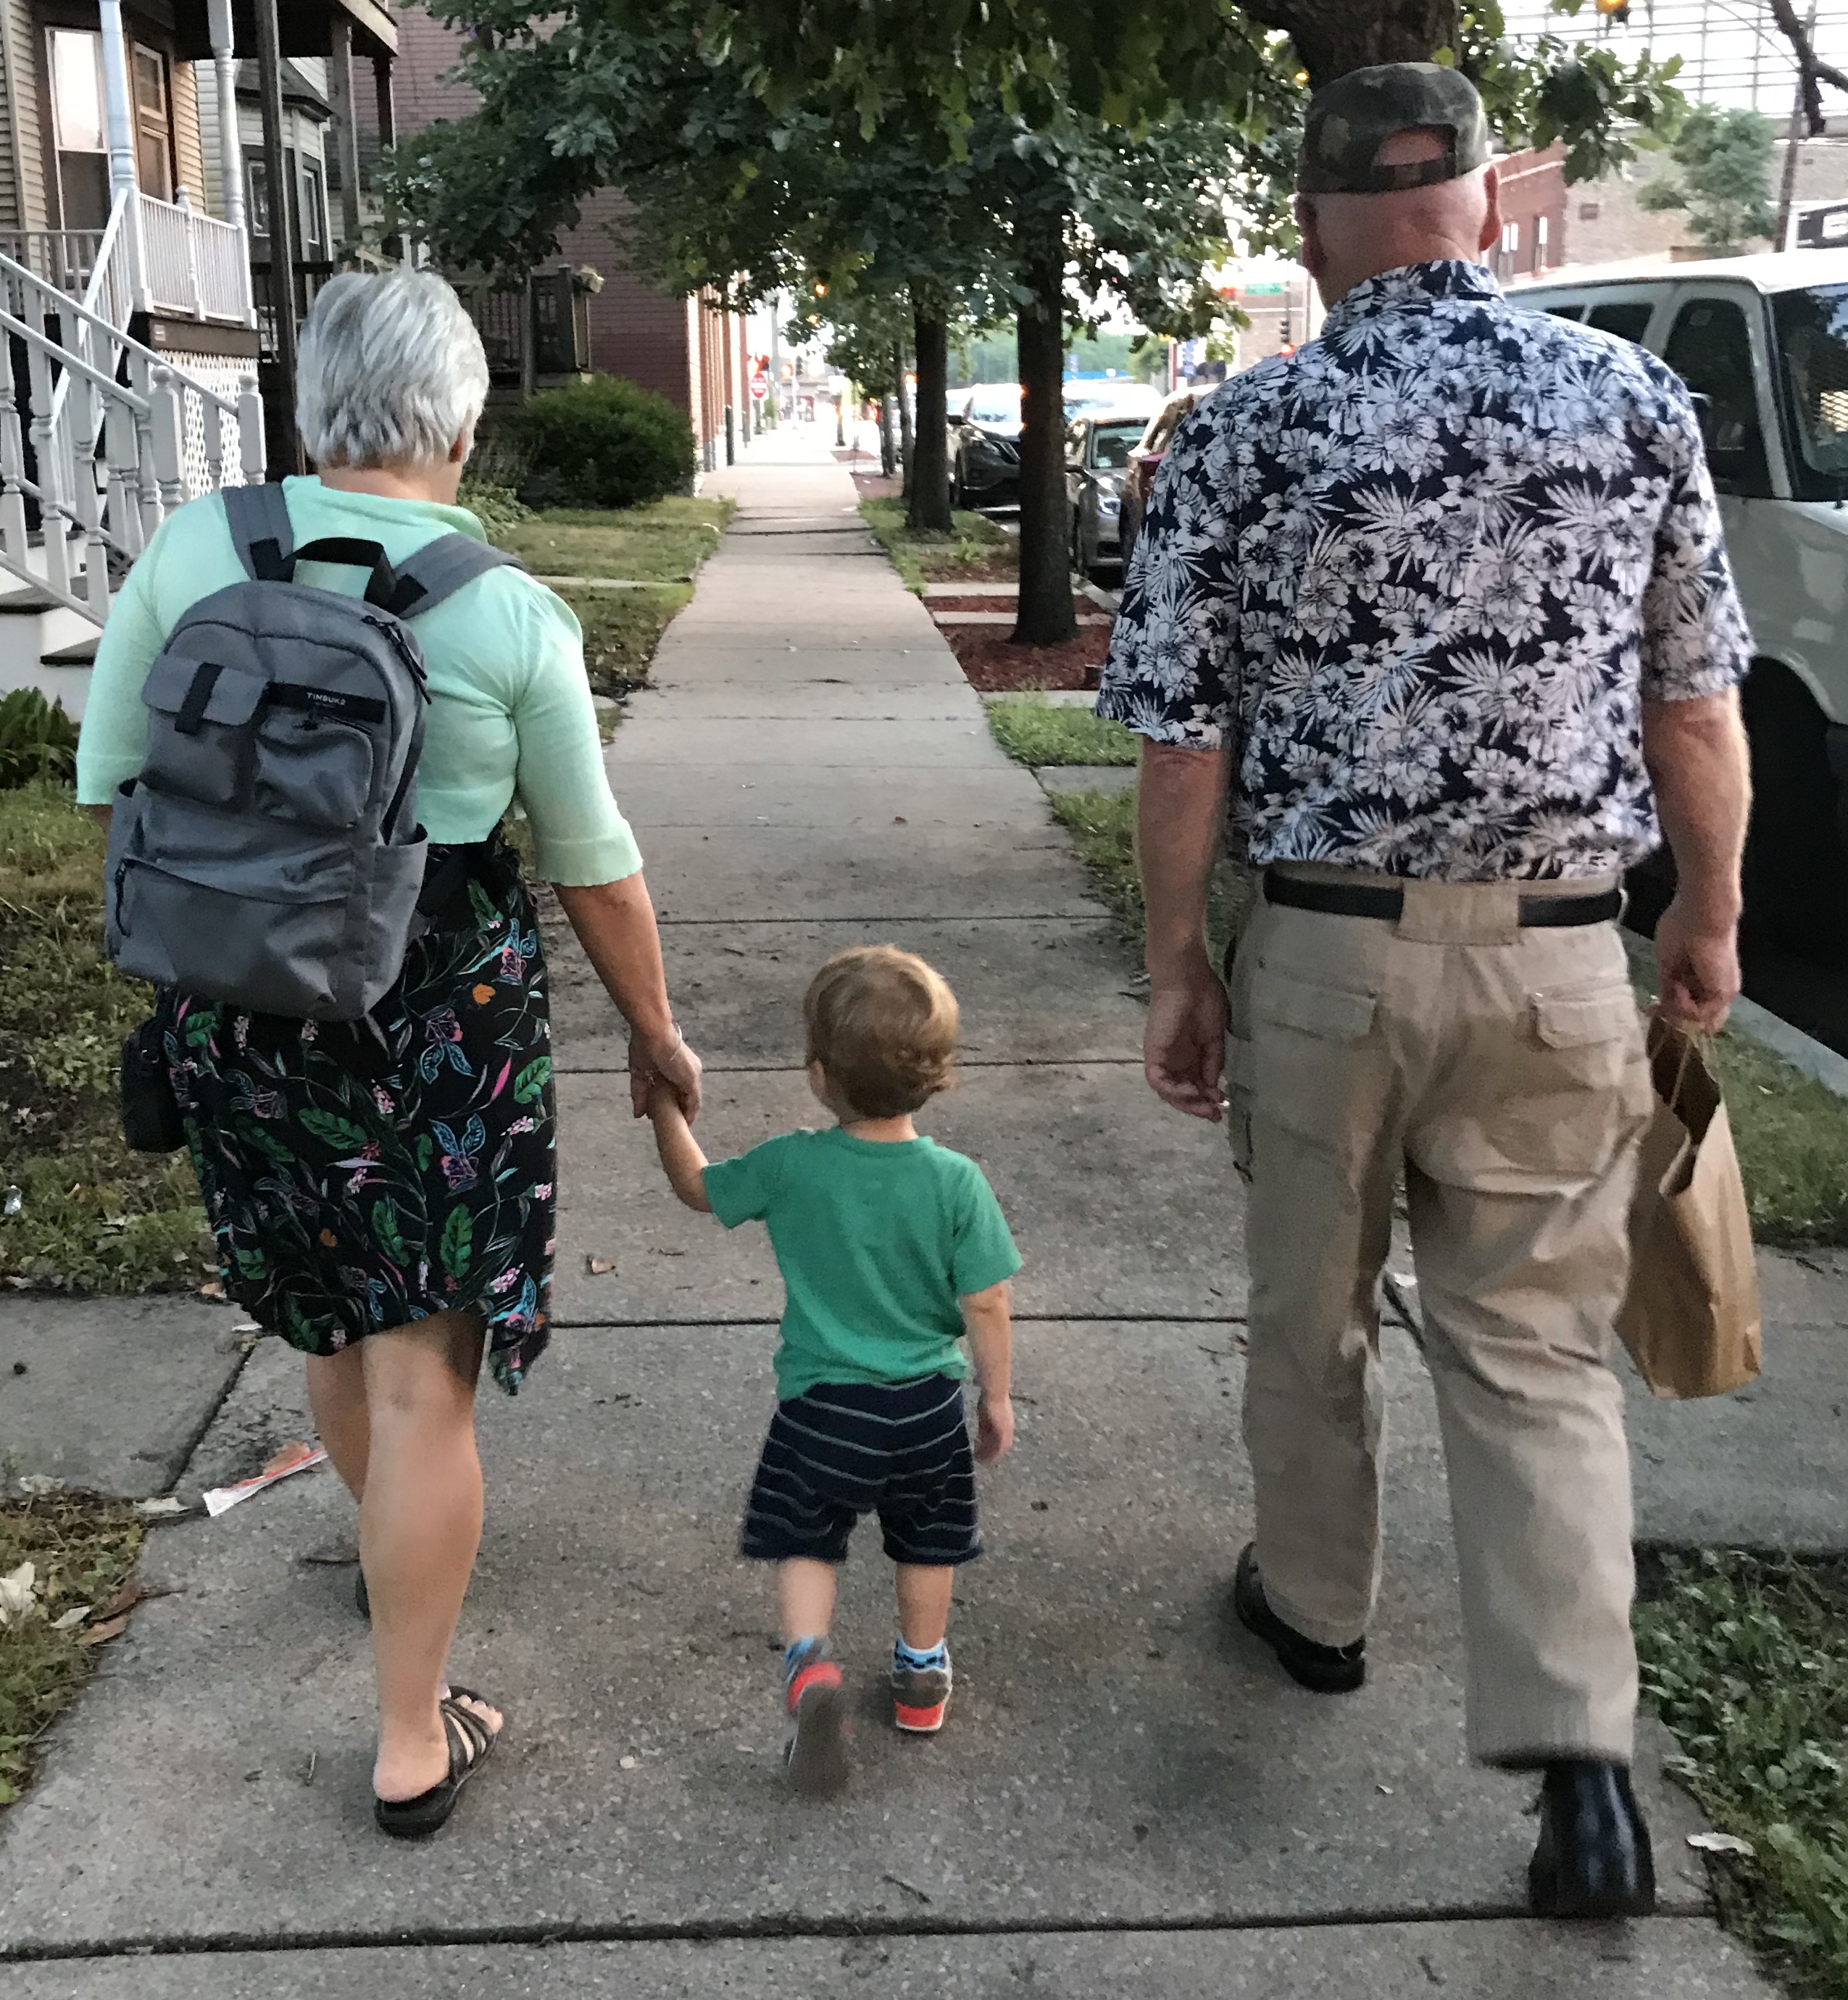 Grandmother and Grandfather walking with Grandson